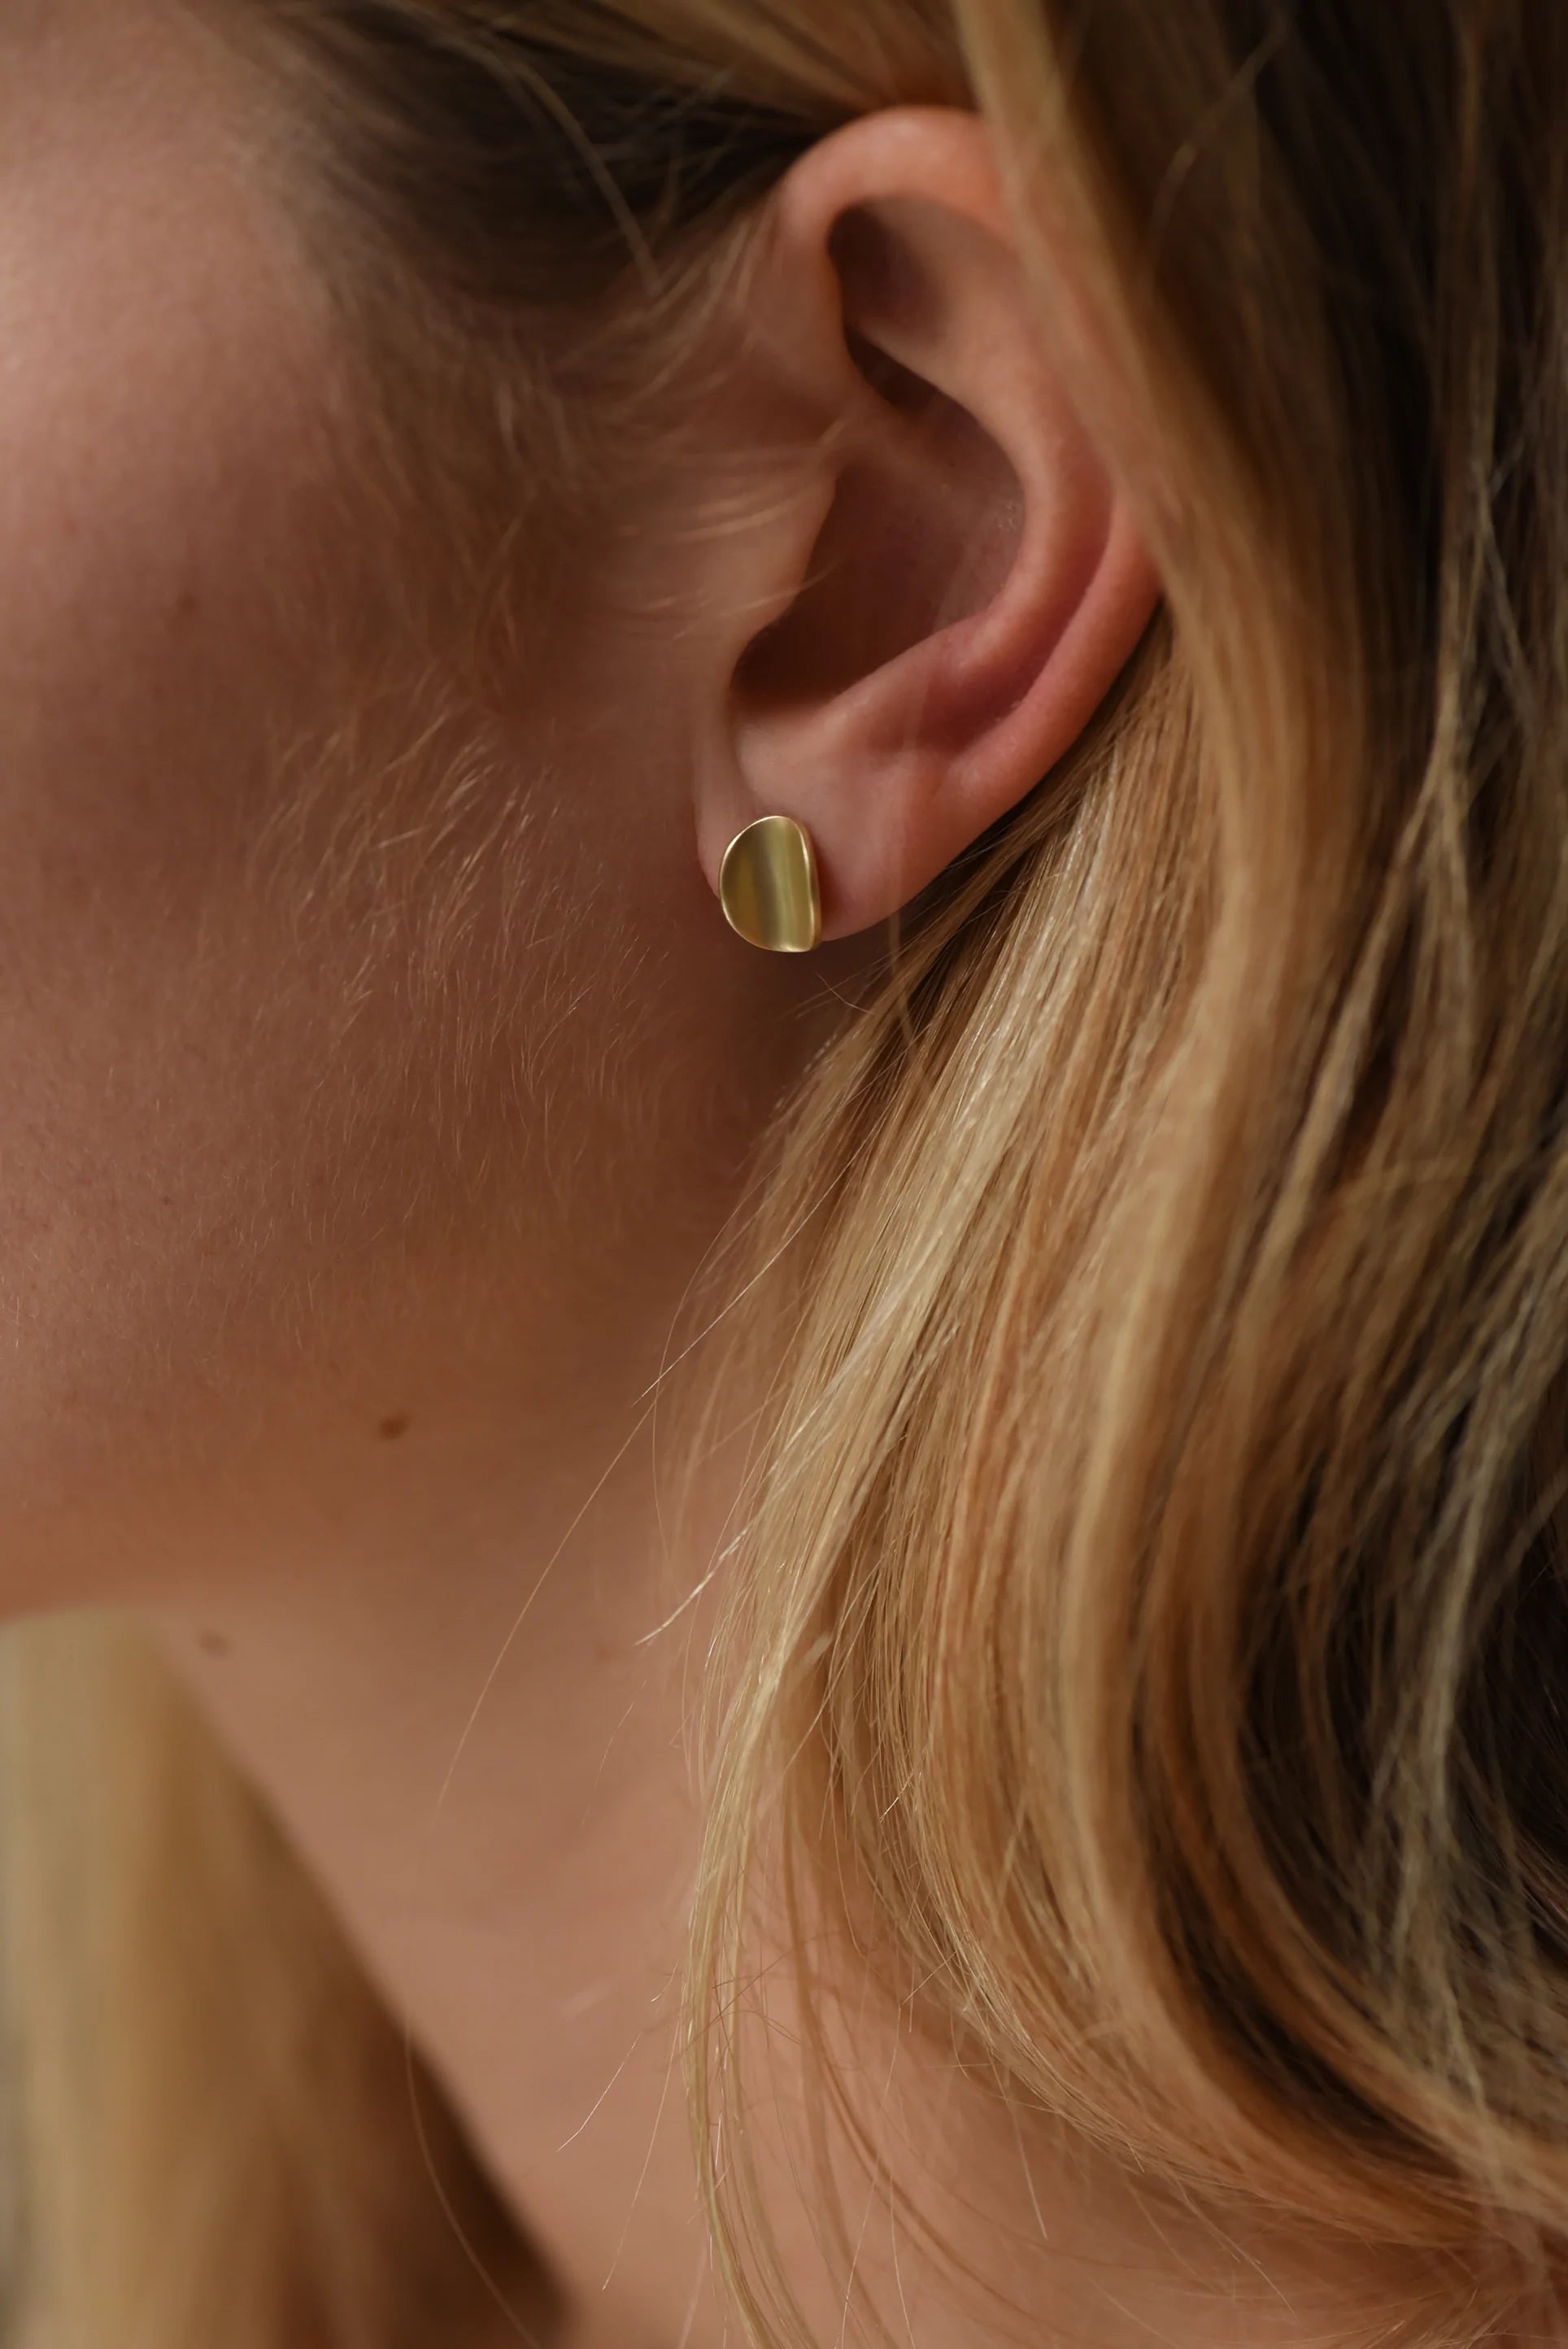 Woman wearing curved organic shaped gold earring studs.